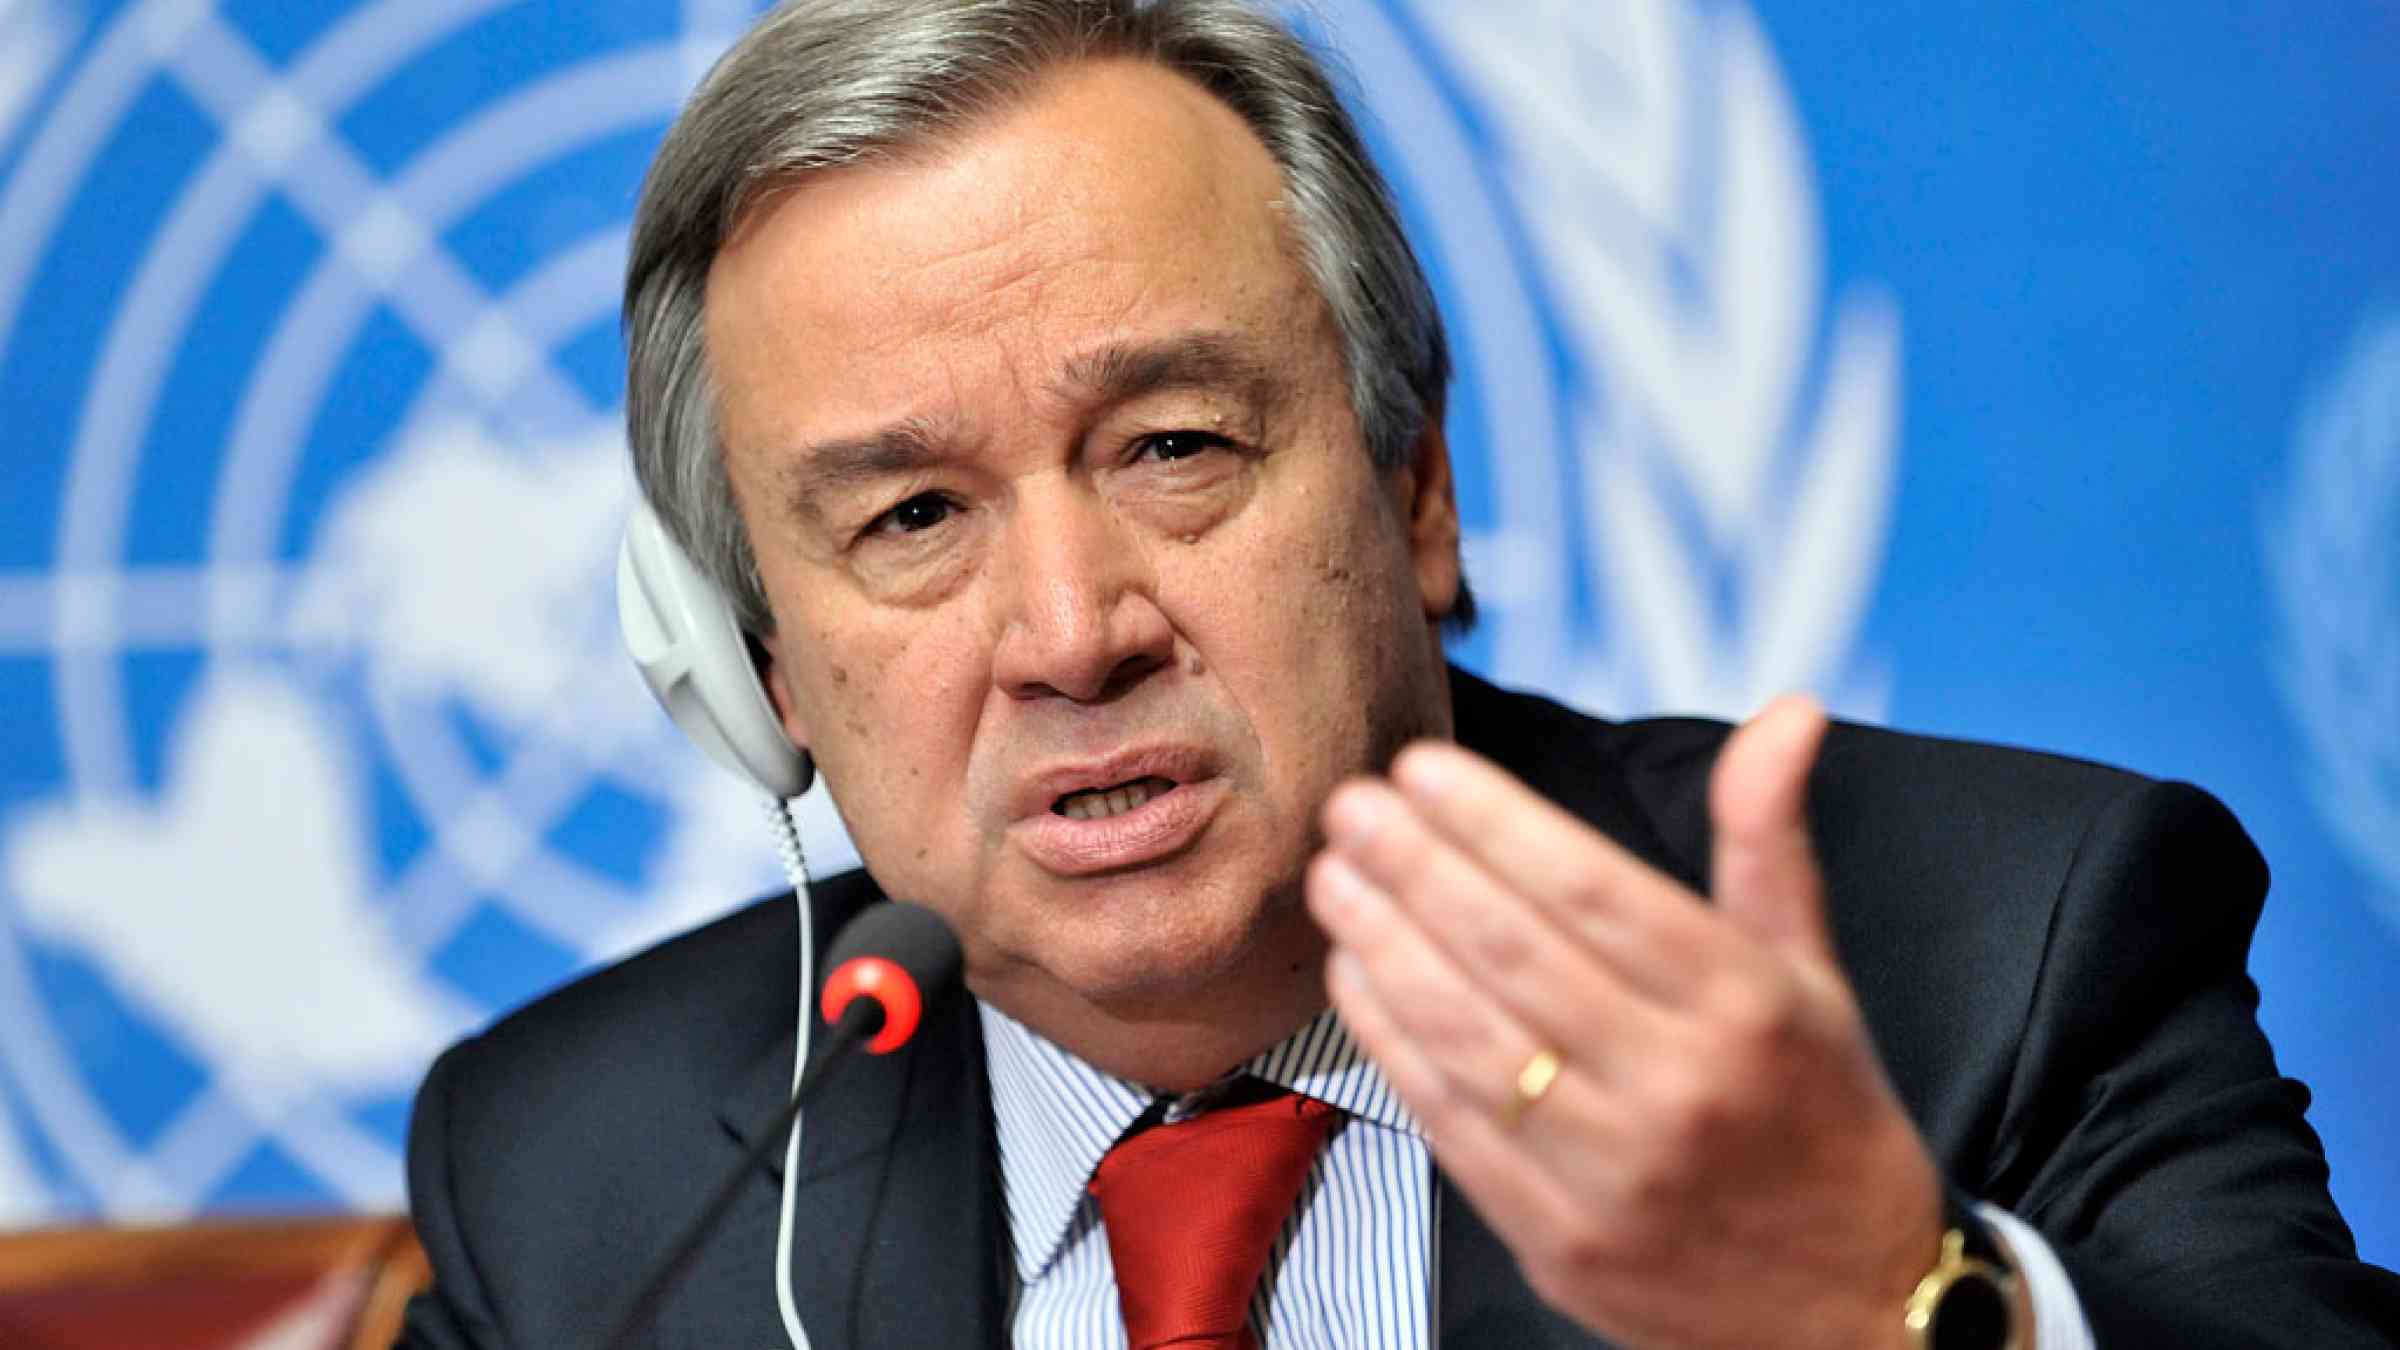 UN Secretary-General António Guterres issues statement to mark International Day for Disaster Risk Reduction